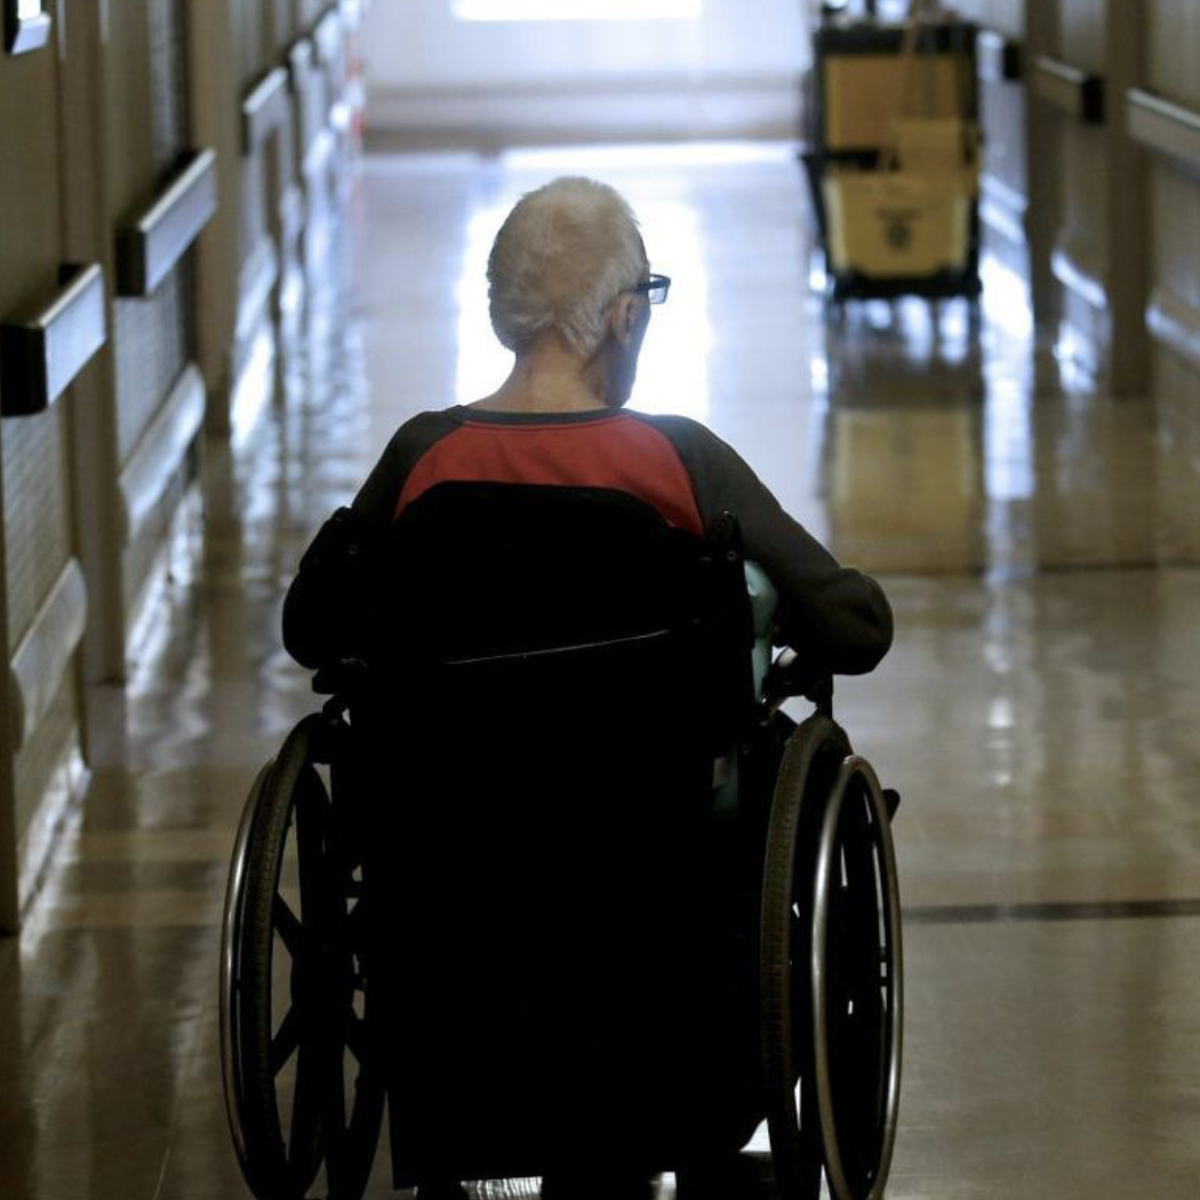 Buffalo Nursing Home Hit With Biggest State Fine From COVID-19 Violations Image